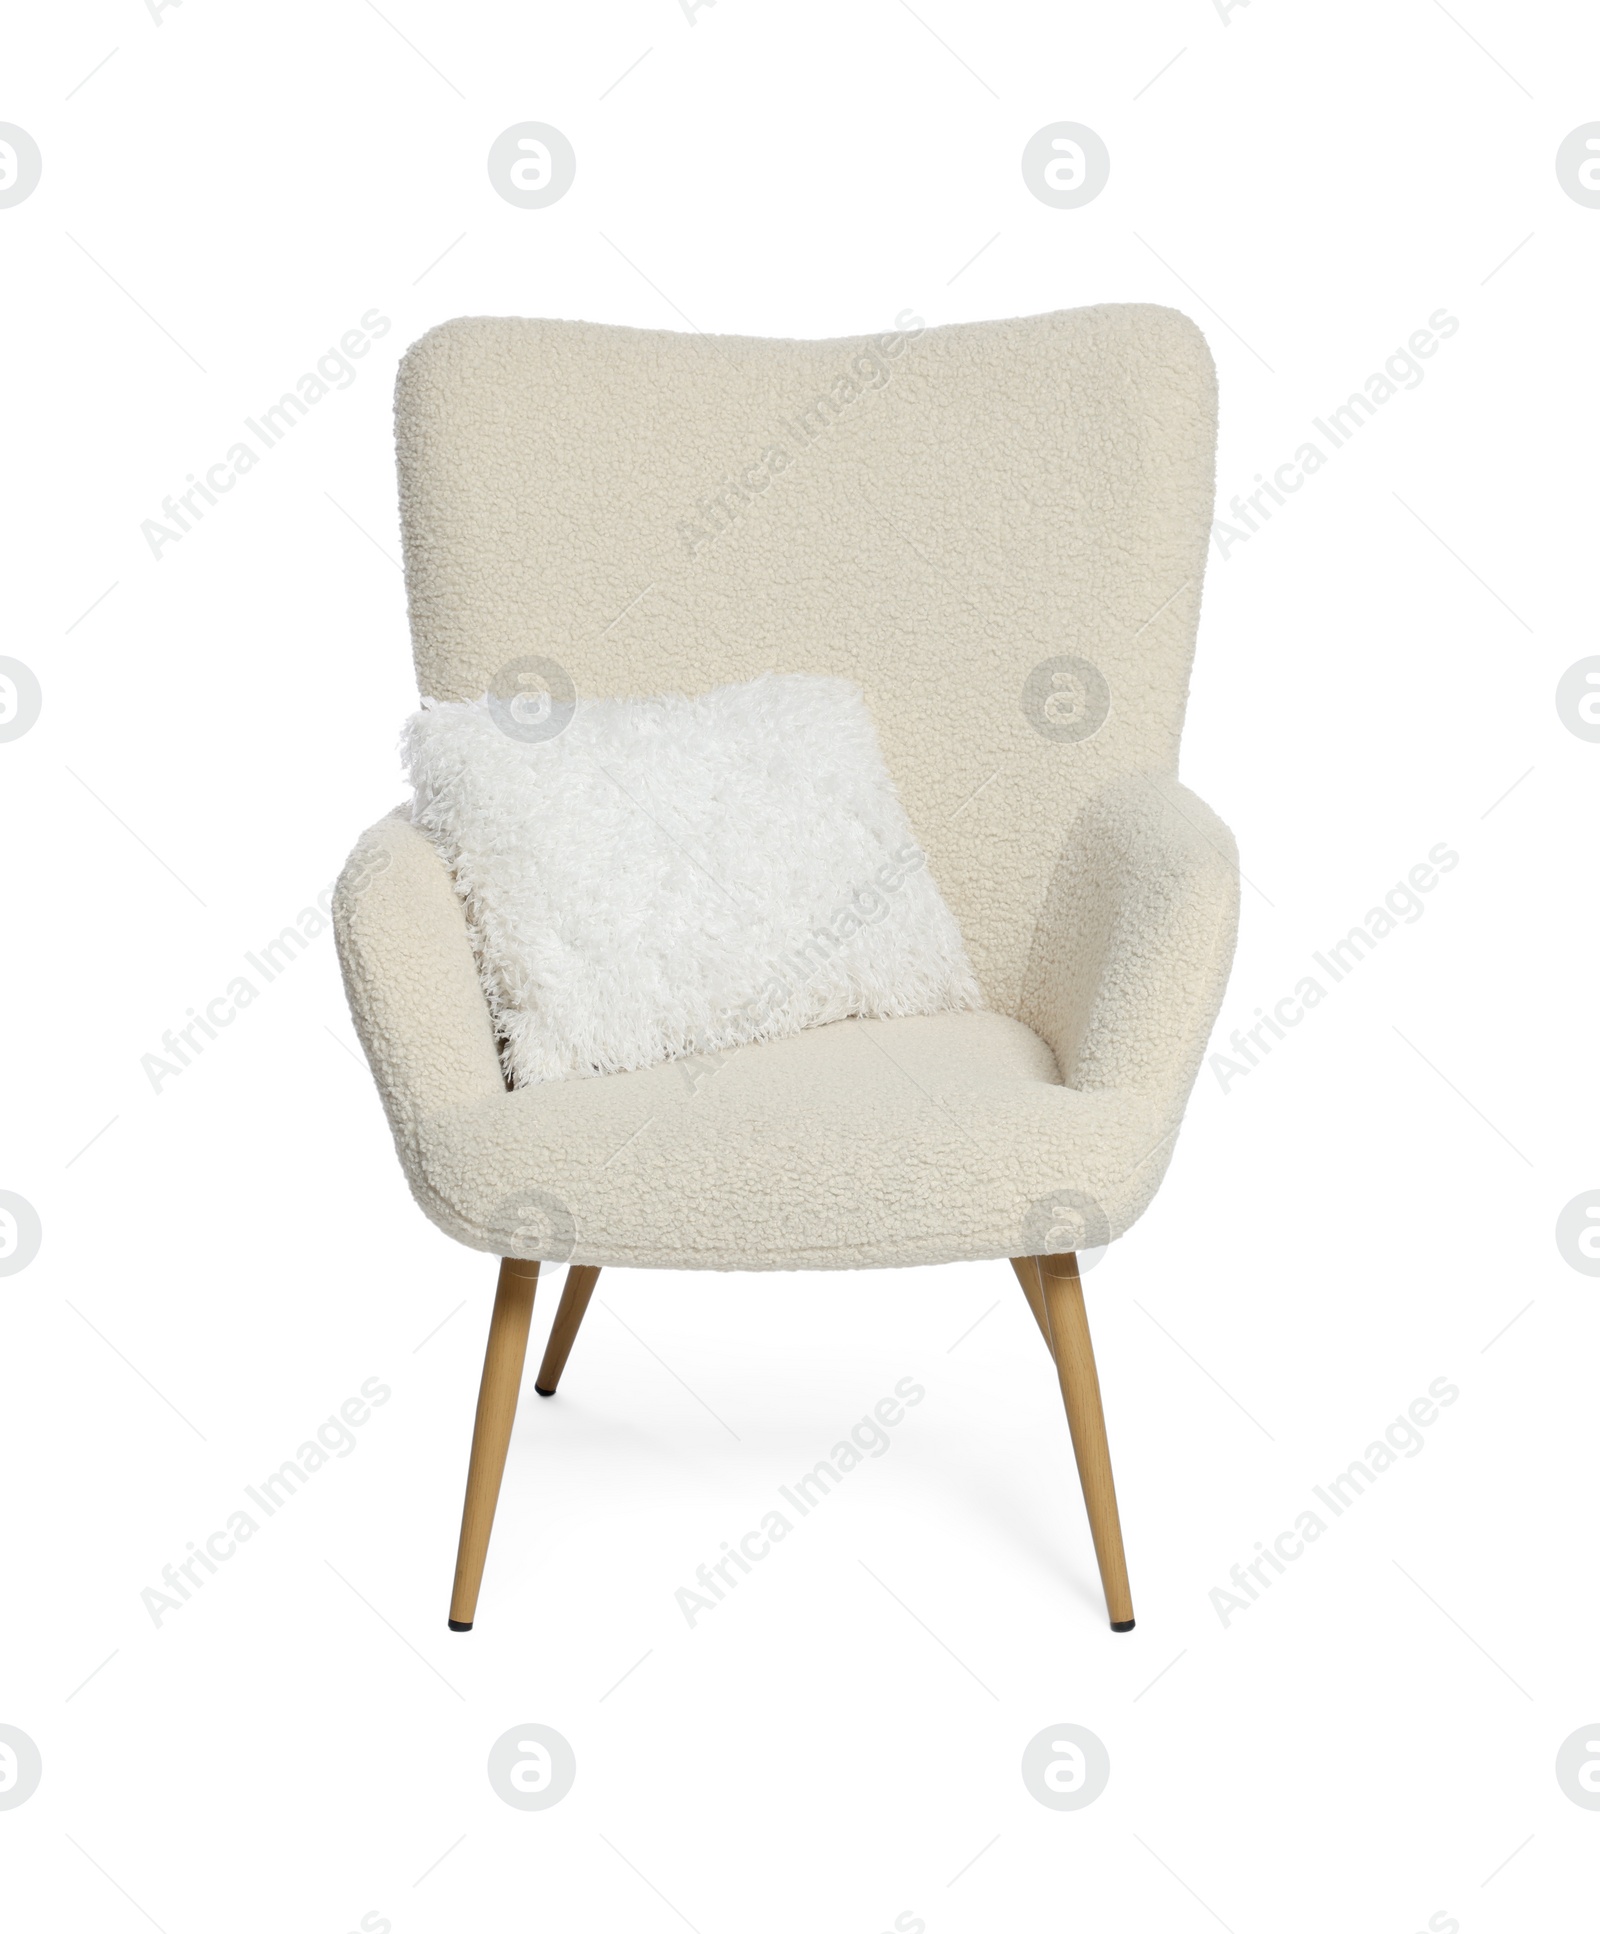 Photo of One stylish comfortable armchair with pillow isolated on white